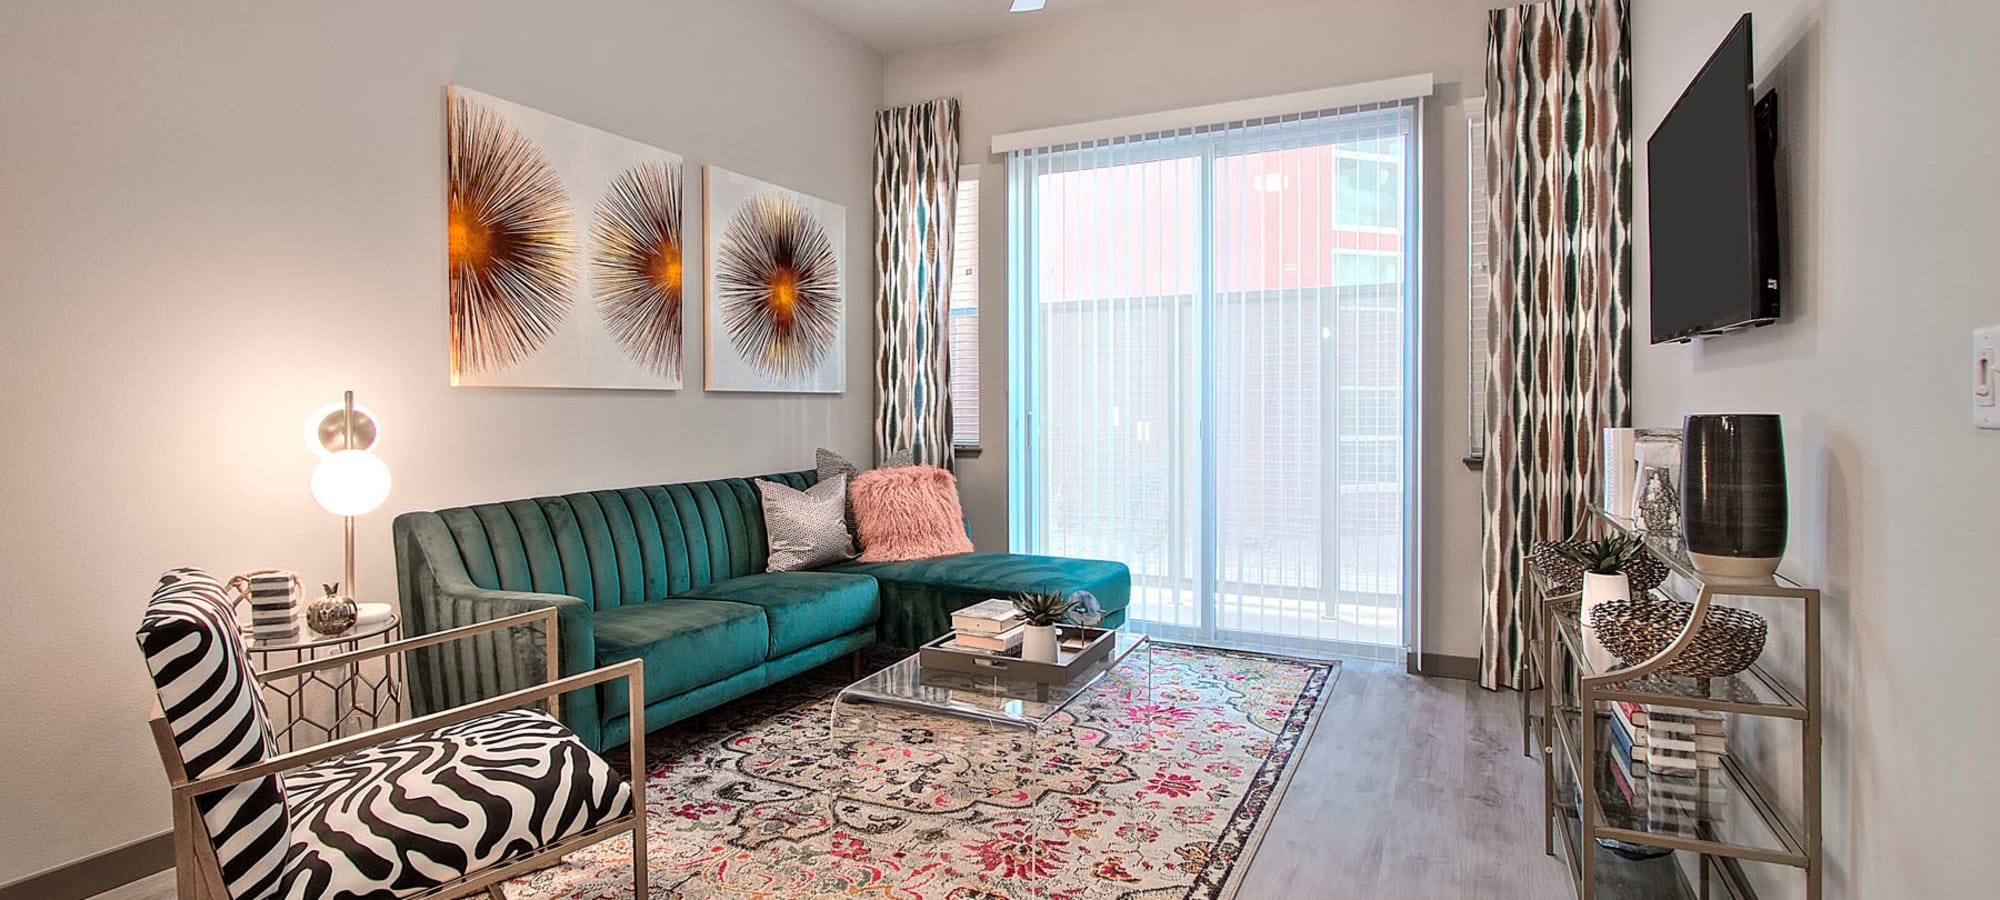 Well-furnished living area in a model apartment at Jade Apartments in Las Vegas, Nevada